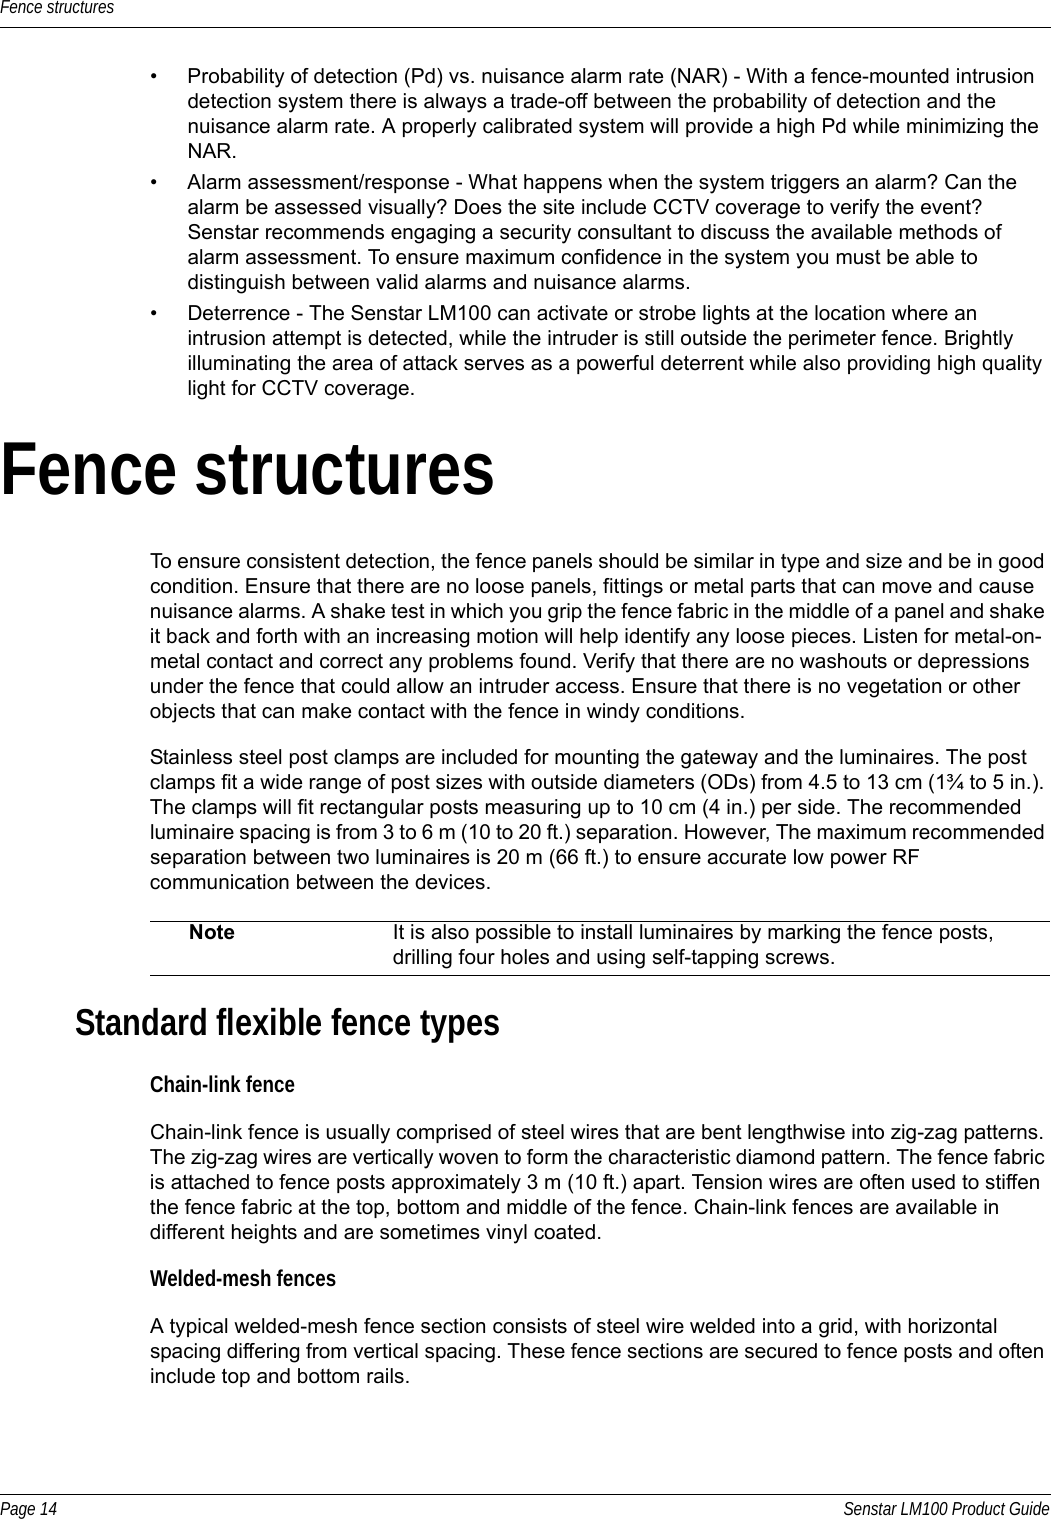 Fence structuresPage 14 Senstar LM100 Product Guide• Probability of detection (Pd) vs. nuisance alarm rate (NAR) - With a fence-mounted intrusion detection system there is always a trade-off between the probability of detection and the nuisance alarm rate. A properly calibrated system will provide a high Pd while minimizing the NAR. • Alarm assessment/response - What happens when the system triggers an alarm? Can the alarm be assessed visually? Does the site include CCTV coverage to verify the event? Senstar recommends engaging a security consultant to discuss the available methods of alarm assessment. To ensure maximum confidence in the system you must be able to distinguish between valid alarms and nuisance alarms.• Deterrence - The Senstar LM100 can activate or strobe lights at the location where an intrusion attempt is detected, while the intruder is still outside the perimeter fence. Brightly illuminating the area of attack serves as a powerful deterrent while also providing high quality light for CCTV coverage.Fence structuresTo ensure consistent detection, the fence panels should be similar in type and size and be in good condition. Ensure that there are no loose panels, fittings or metal parts that can move and cause nuisance alarms. A shake test in which you grip the fence fabric in the middle of a panel and shake it back and forth with an increasing motion will help identify any loose pieces. Listen for metal-on-metal contact and correct any problems found. Verify that there are no washouts or depressions under the fence that could allow an intruder access. Ensure that there is no vegetation or other objects that can make contact with the fence in windy conditions.Stainless steel post clamps are included for mounting the gateway and the luminaires. The post clamps fit a wide range of post sizes with outside diameters (ODs) from 4.5 to 13 cm (1¾ to 5 in.). The clamps will fit rectangular posts measuring up to 10 cm (4 in.) per side. The recommended luminaire spacing is from 3 to 6 m (10 to 20 ft.) separation. However, The maximum recommended separation between two luminaires is 20 m (66 ft.) to ensure accurate low power RF communication between the devices.Standard flexible fence types Chain-link fenceChain-link fence is usually comprised of steel wires that are bent lengthwise into zig-zag patterns. The zig-zag wires are vertically woven to form the characteristic diamond pattern. The fence fabric is attached to fence posts approximately 3 m (10 ft.) apart. Tension wires are often used to stiffen the fence fabric at the top, bottom and middle of the fence. Chain-link fences are available in different heights and are sometimes vinyl coated. Welded-mesh fencesA typical welded-mesh fence section consists of steel wire welded into a grid, with horizontal spacing differing from vertical spacing. These fence sections are secured to fence posts and often include top and bottom rails.Note It is also possible to install luminaires by marking the fence posts, drilling four holes and using self-tapping screws.